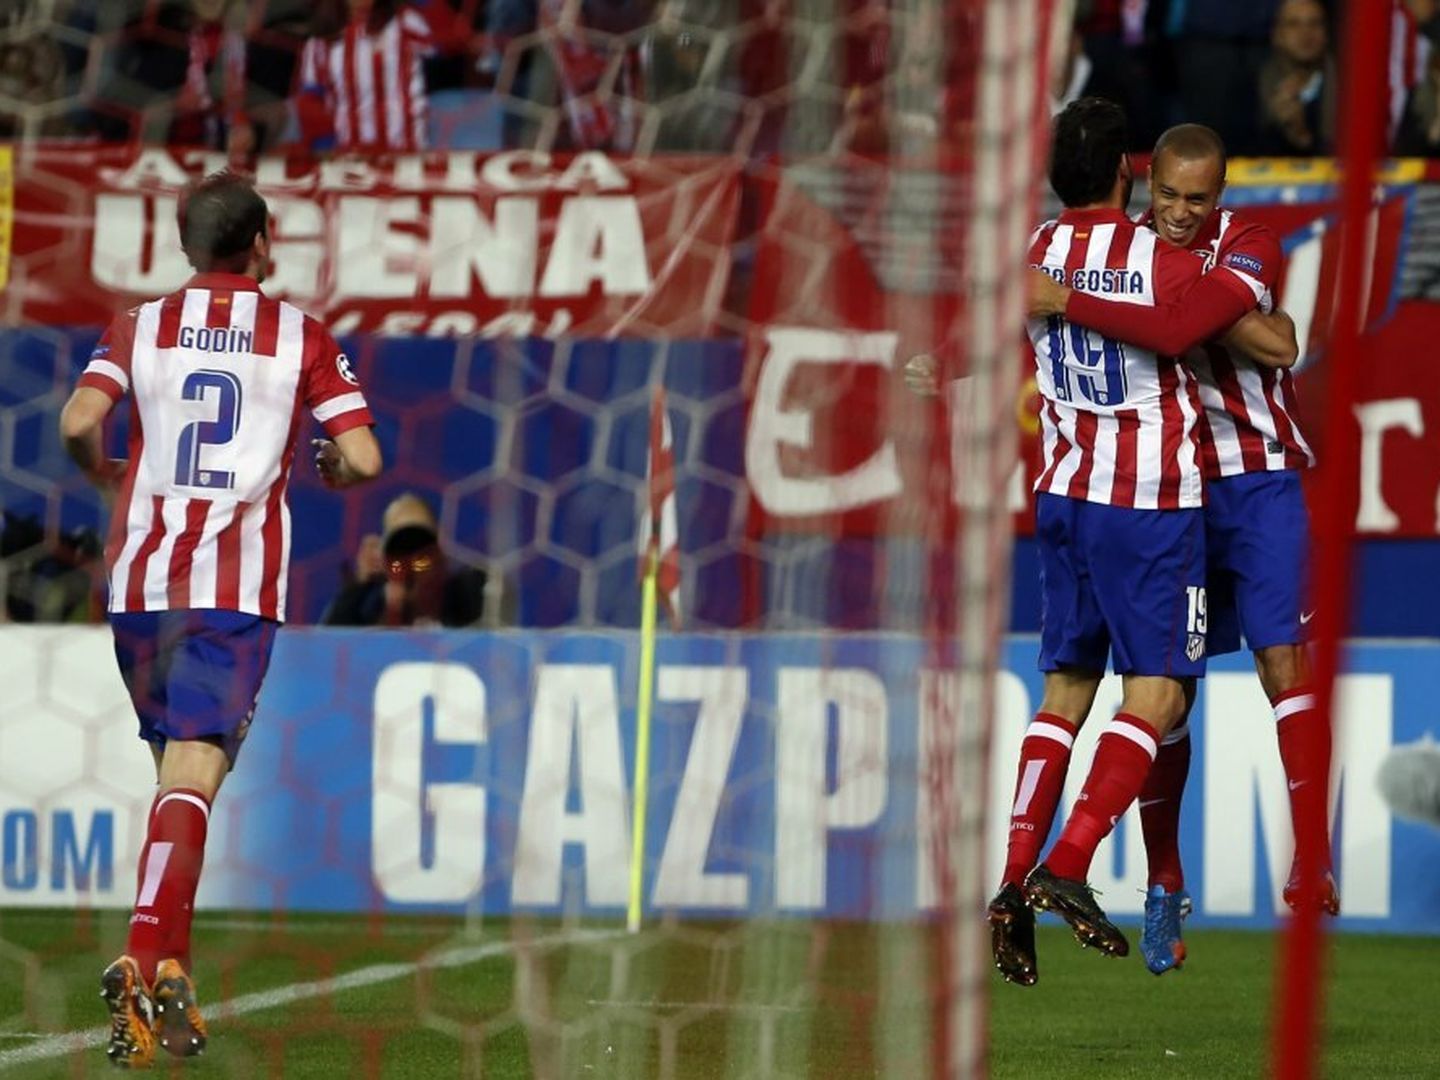 Atletico madrid's miranda celebrates scoring against austria vienna with teammate diego costa during their champions league group g soccer match at vicente calderon stadium in madrid